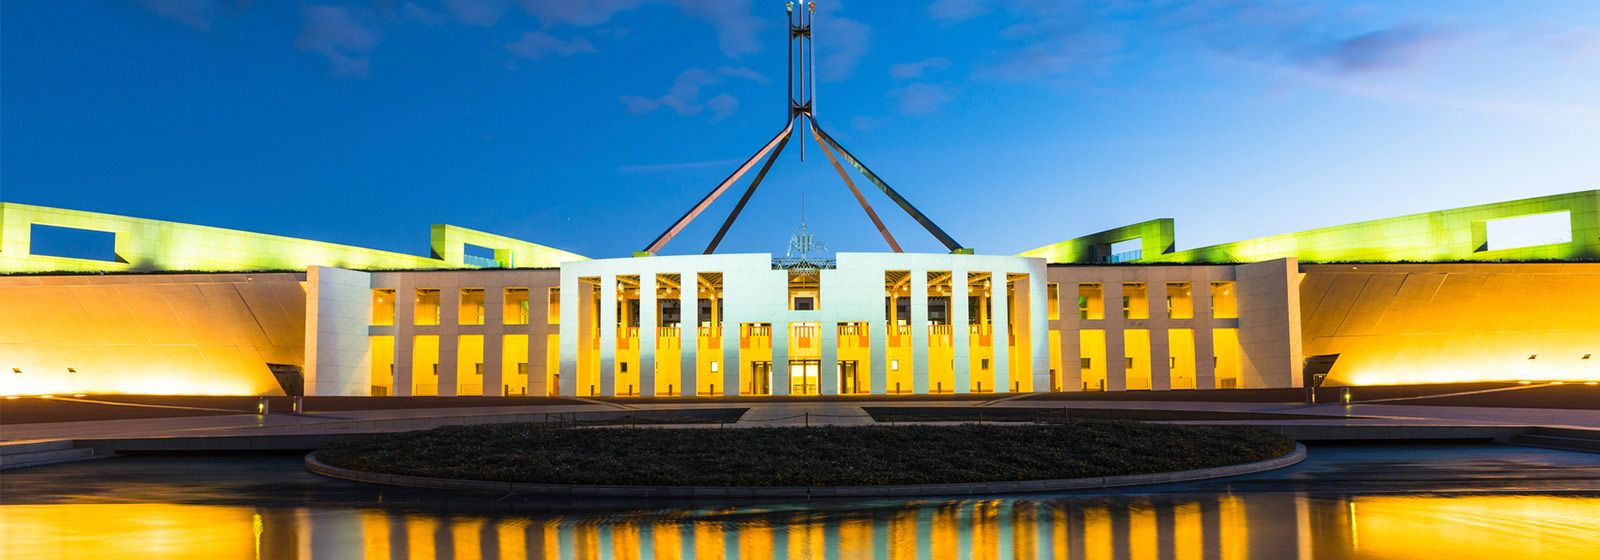 view of the front door of the Parliament house in Canberra at night